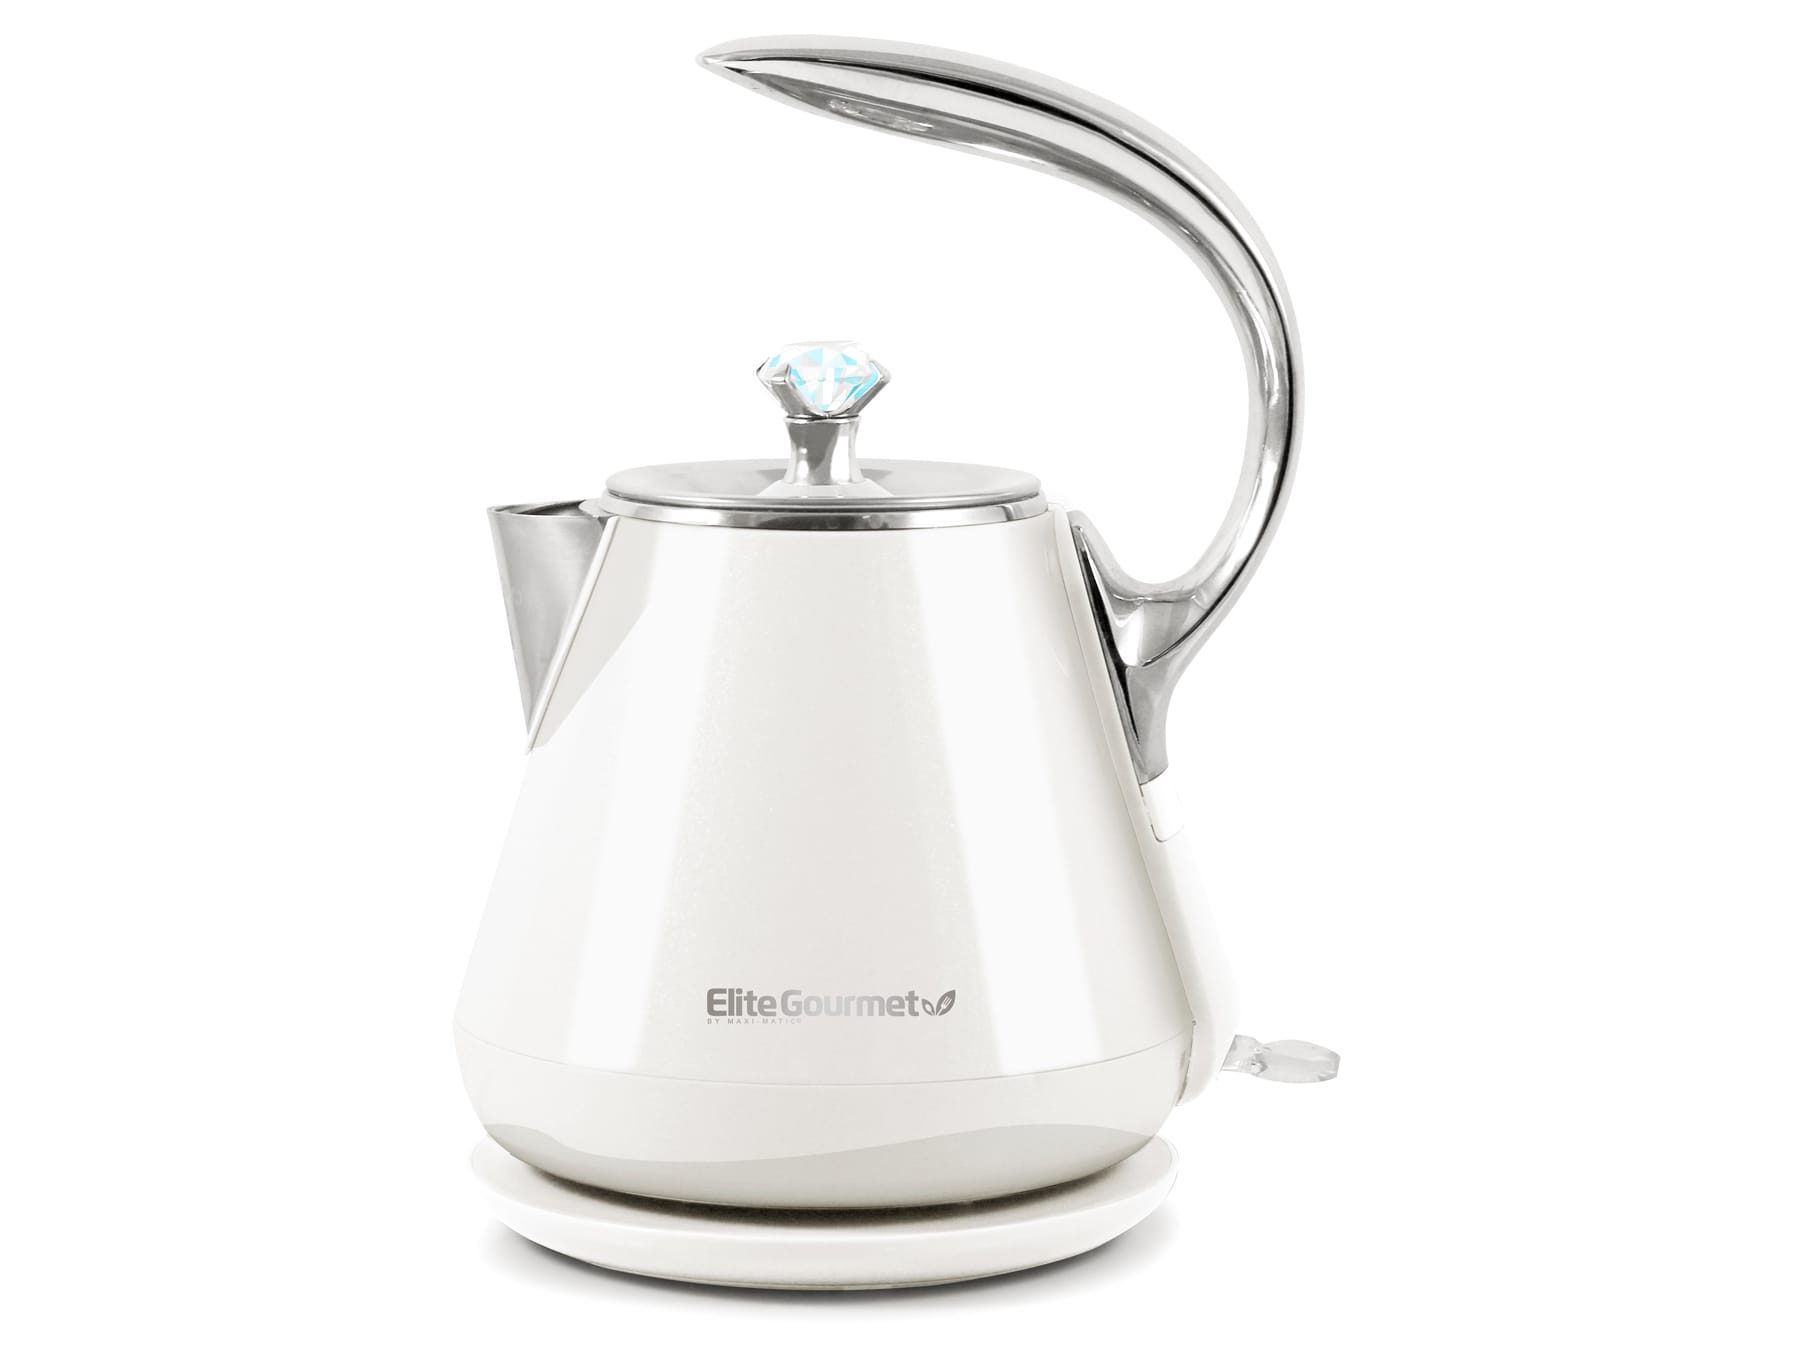 Cuisinart QuicKettle Electric 0.5 Liter Tea Kettle with Stay Cool Handle,  White, 1 Piece - Ralphs